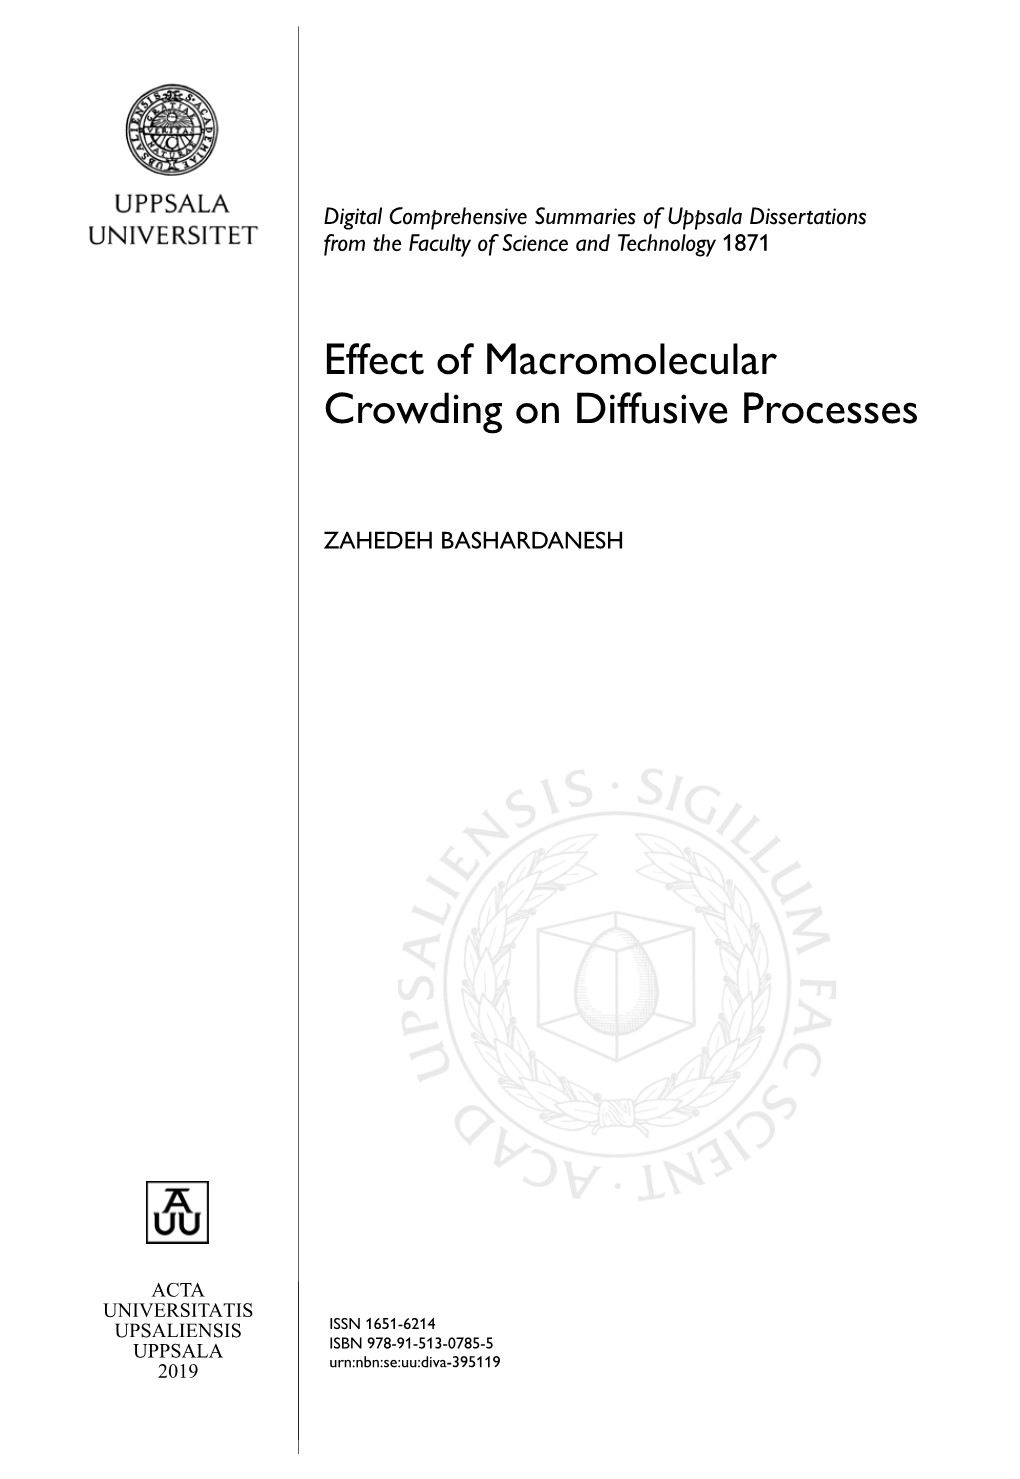 Effect of Macromolecular Crowding on Diffusive Processes